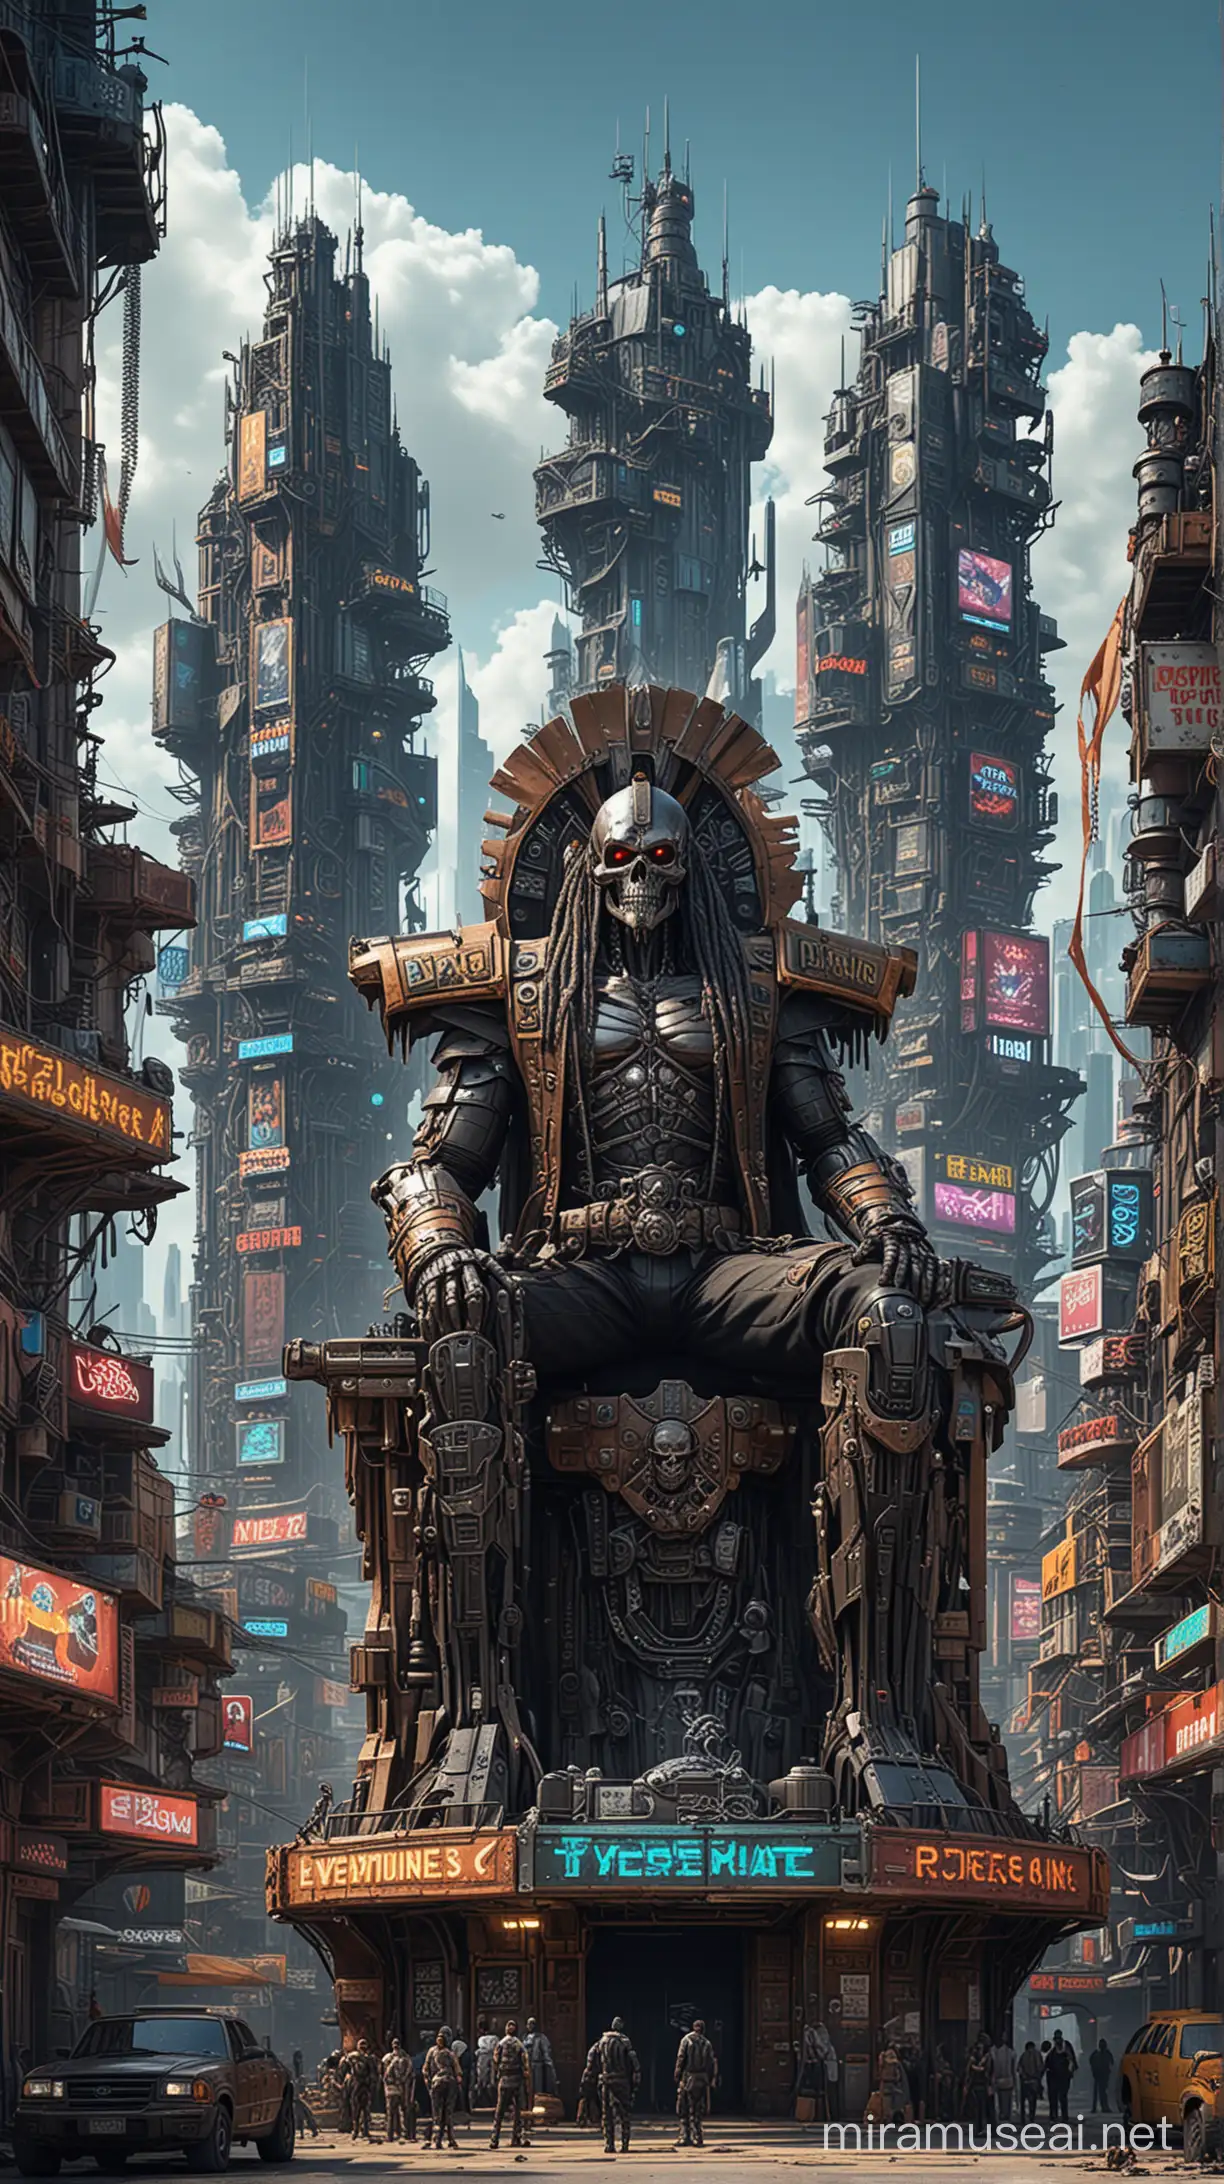 A hyper-realistic rendering of a futuristic pirate city, with towering skyscrapers made of scrap metal and neon signs advertising the latest cybernetic enhancements. In the center of the city, a brutal pirate king sits on his throne, surrounded by his loyal crew.